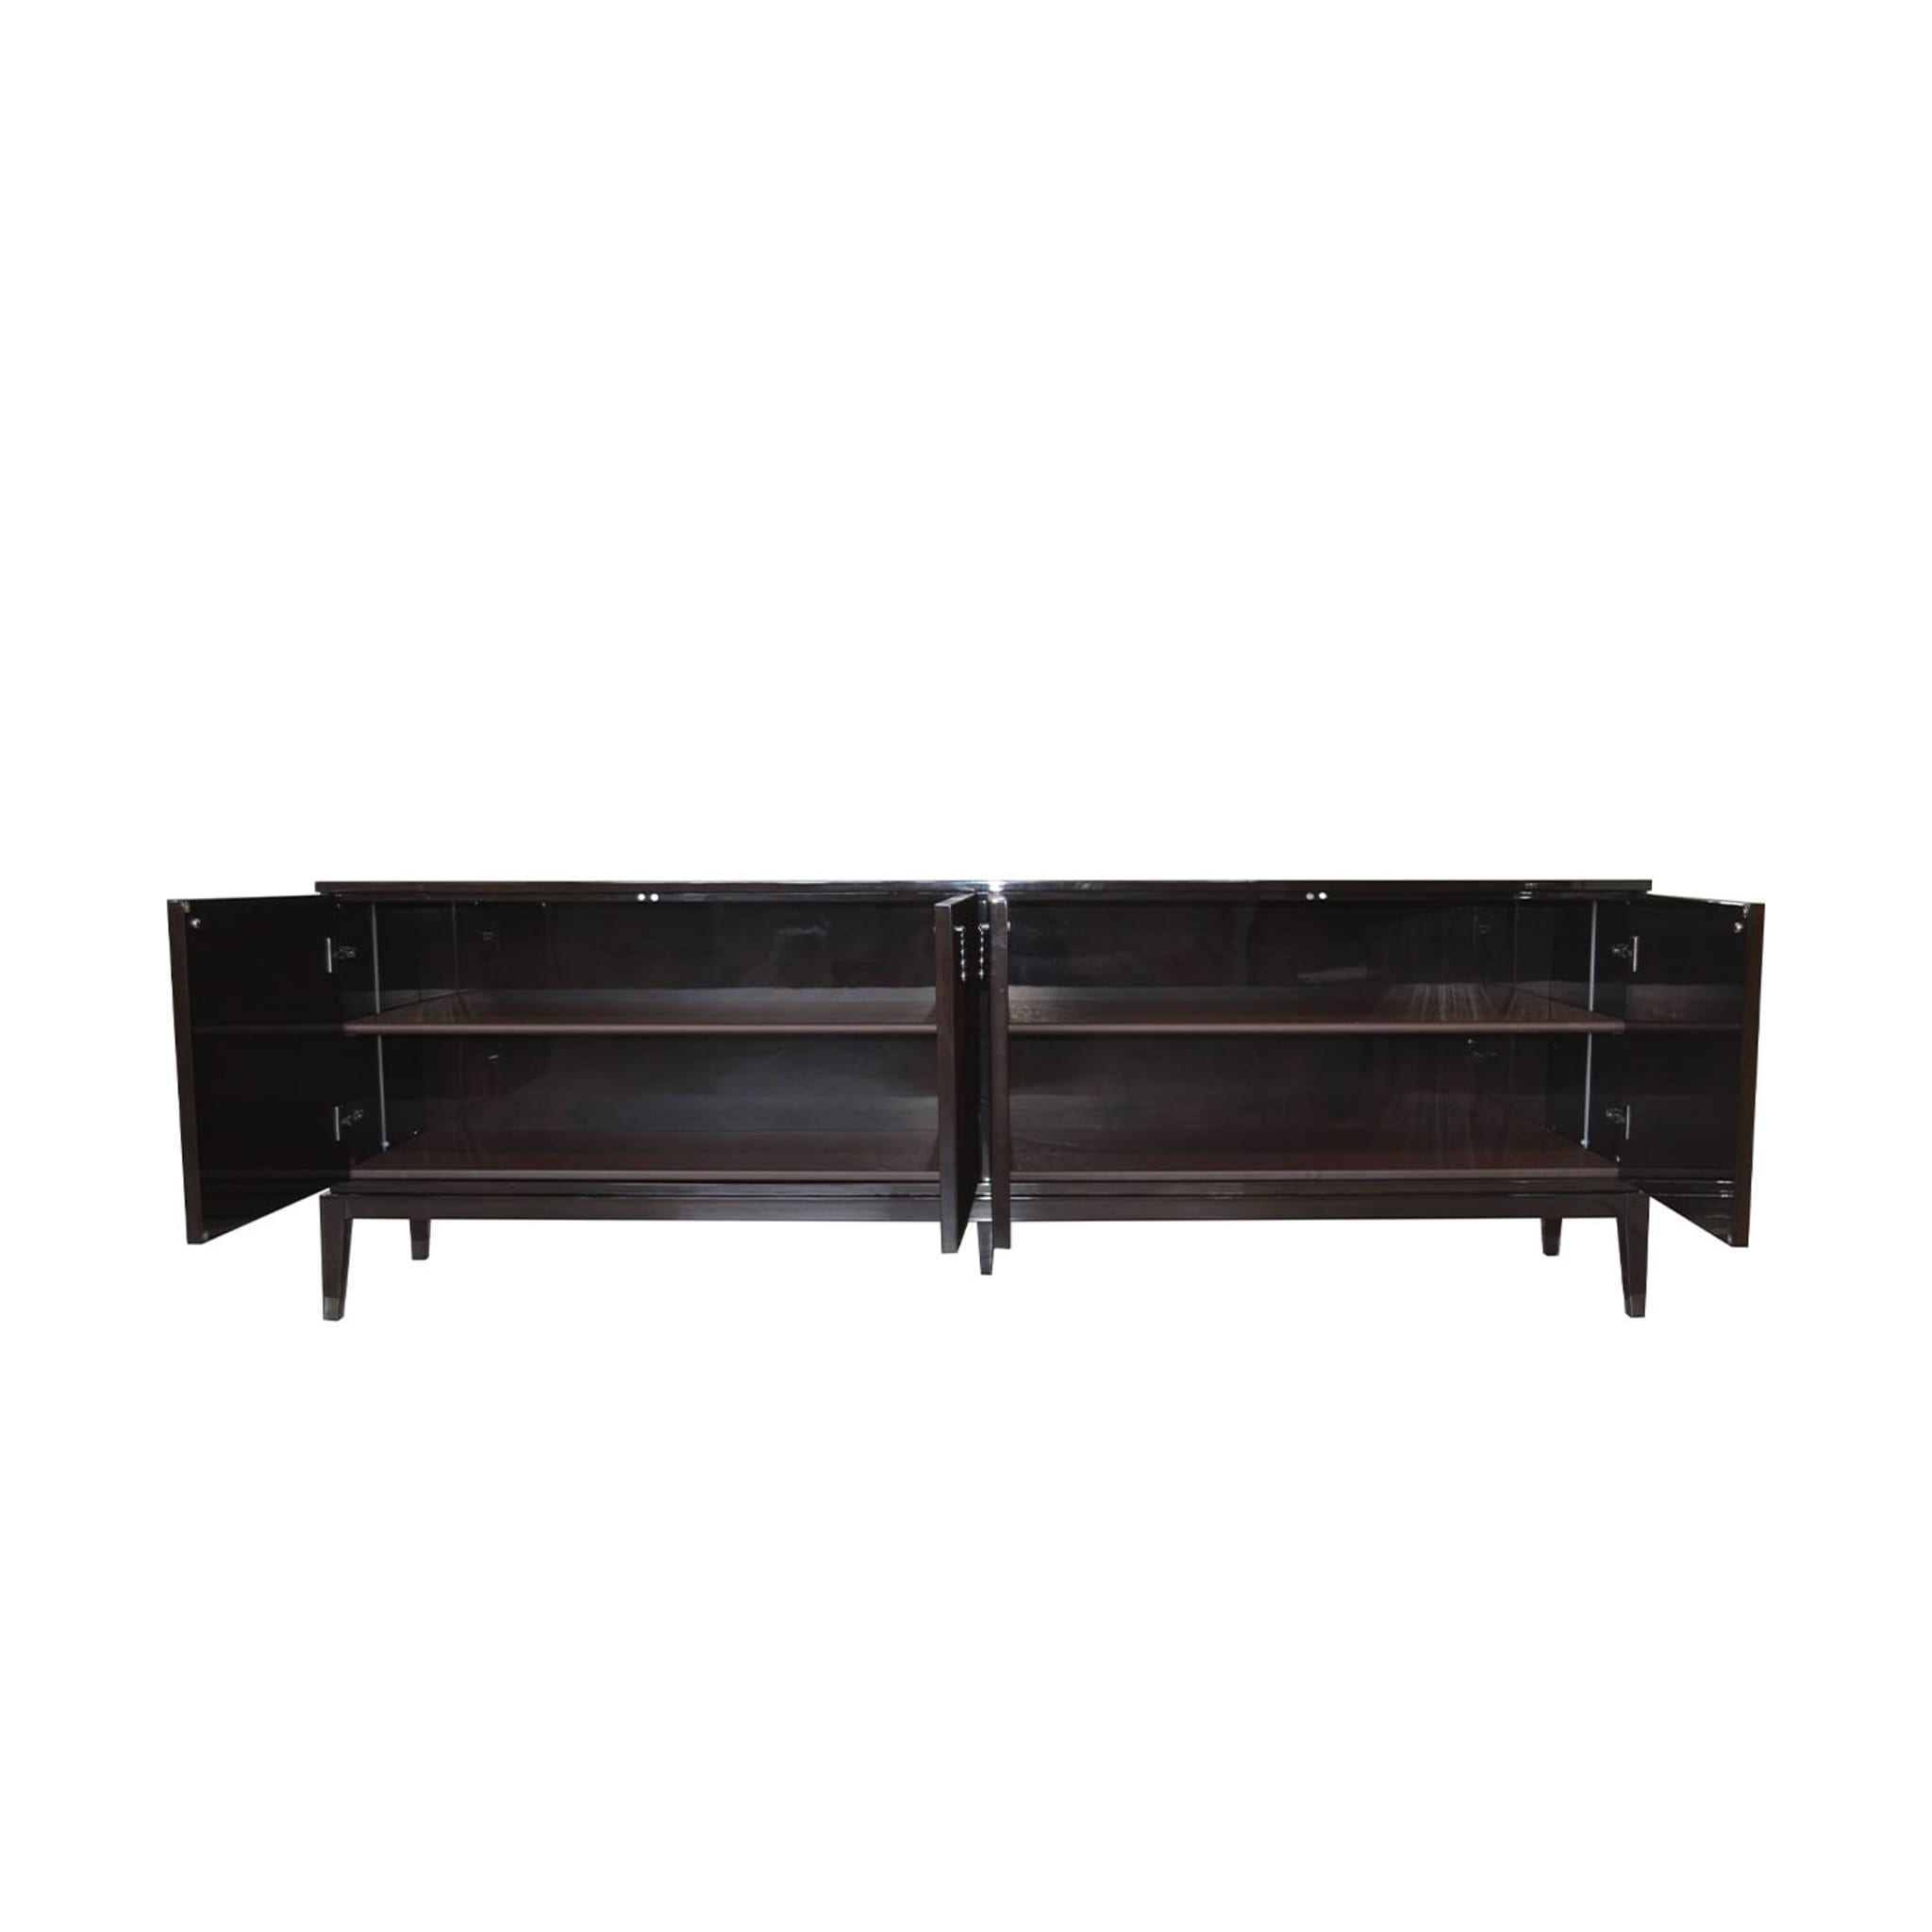 Italian Sideboard in Ebony Brown Color with Four Doors - Alternative view 2